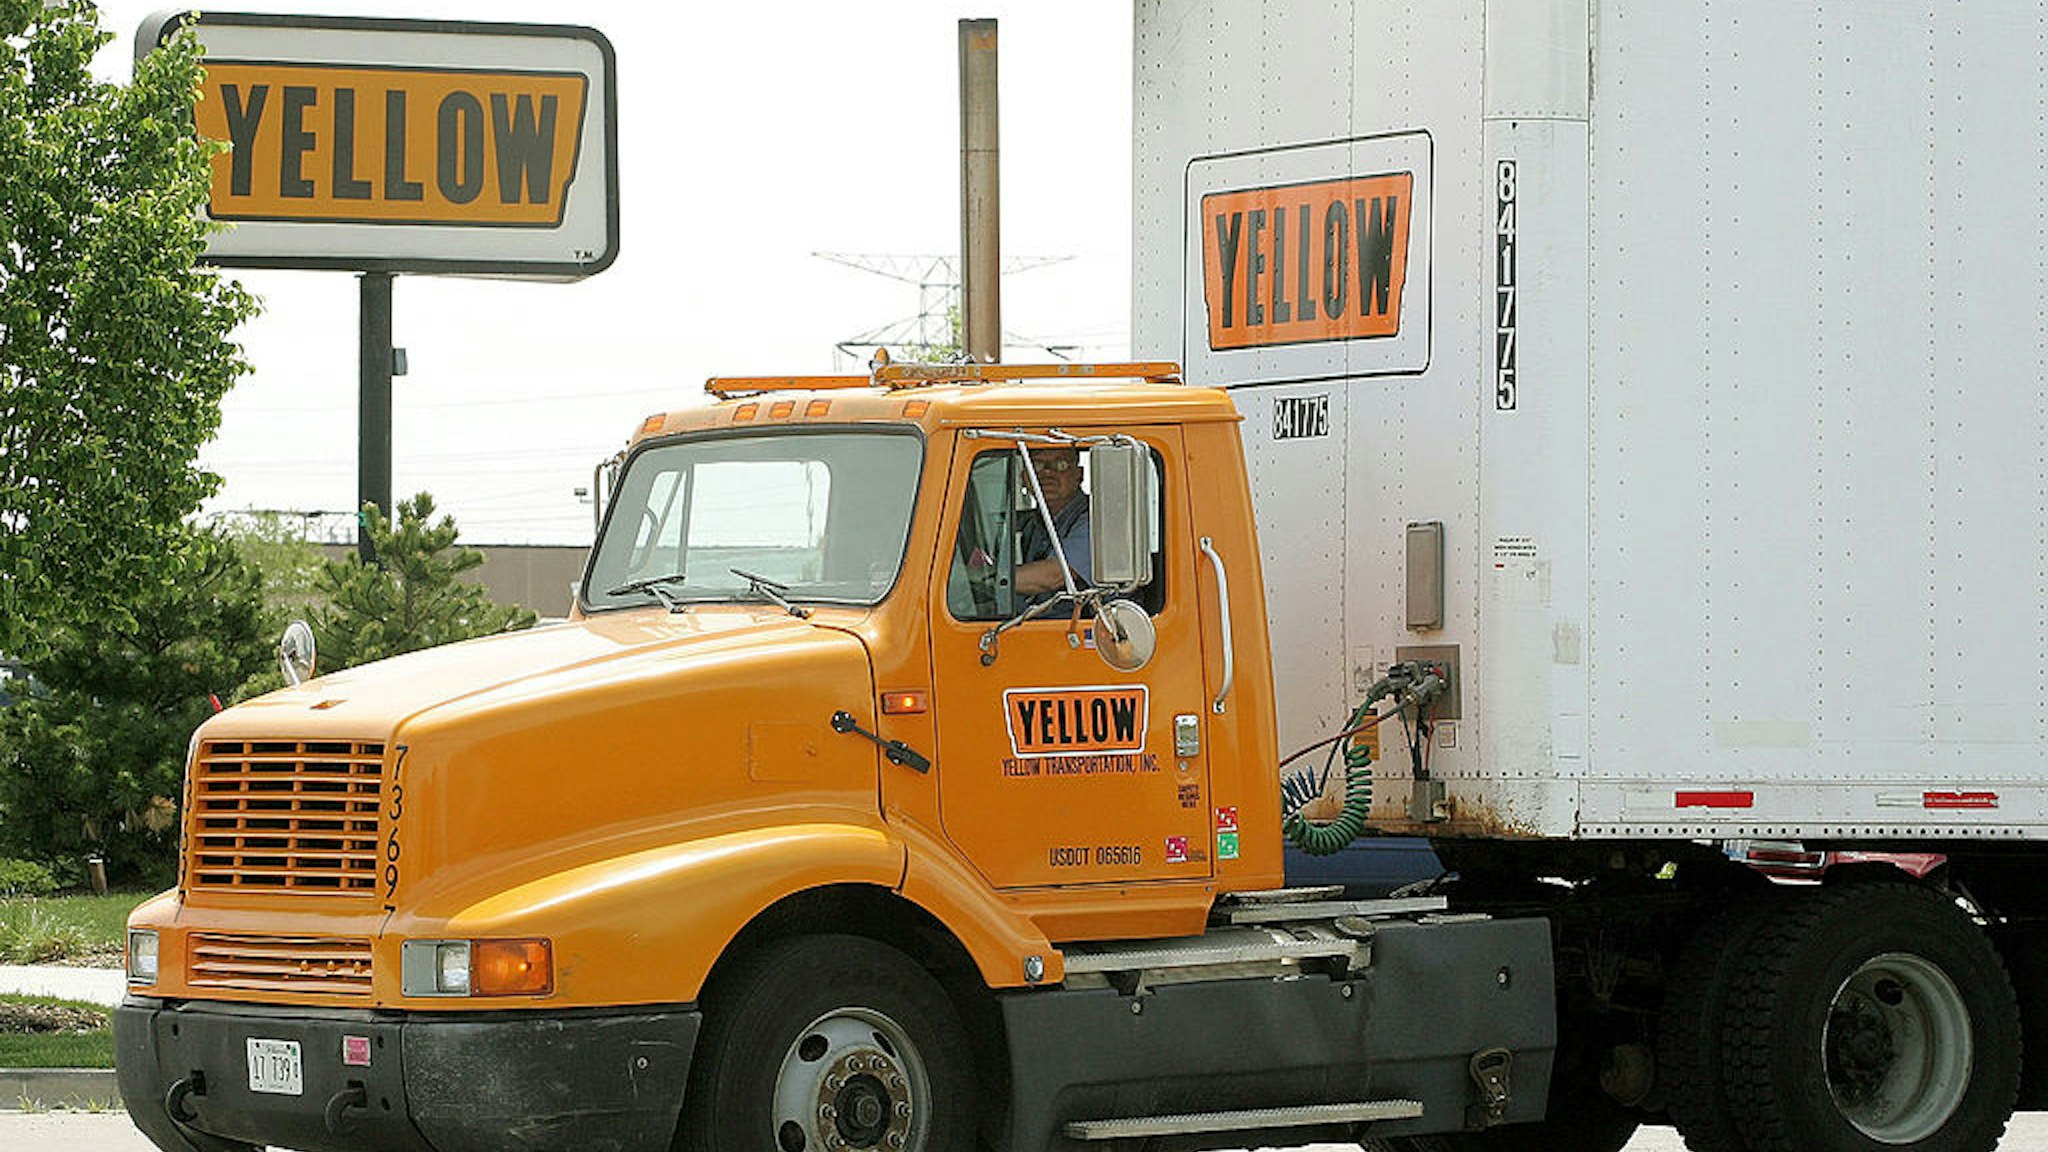 WHEELING, IL - MAY 25: A Yellow truck leaves the truck terminal May 25, 2005 in Wheeling, Illinois. In a $1.37 billion deal, Overland Park, Kansas-based Yellow Roadway has acquired Chicago-based USF Corporation. Yellow Roadway's workers will now number close to 70,000 with a $9 billion annual revenue.